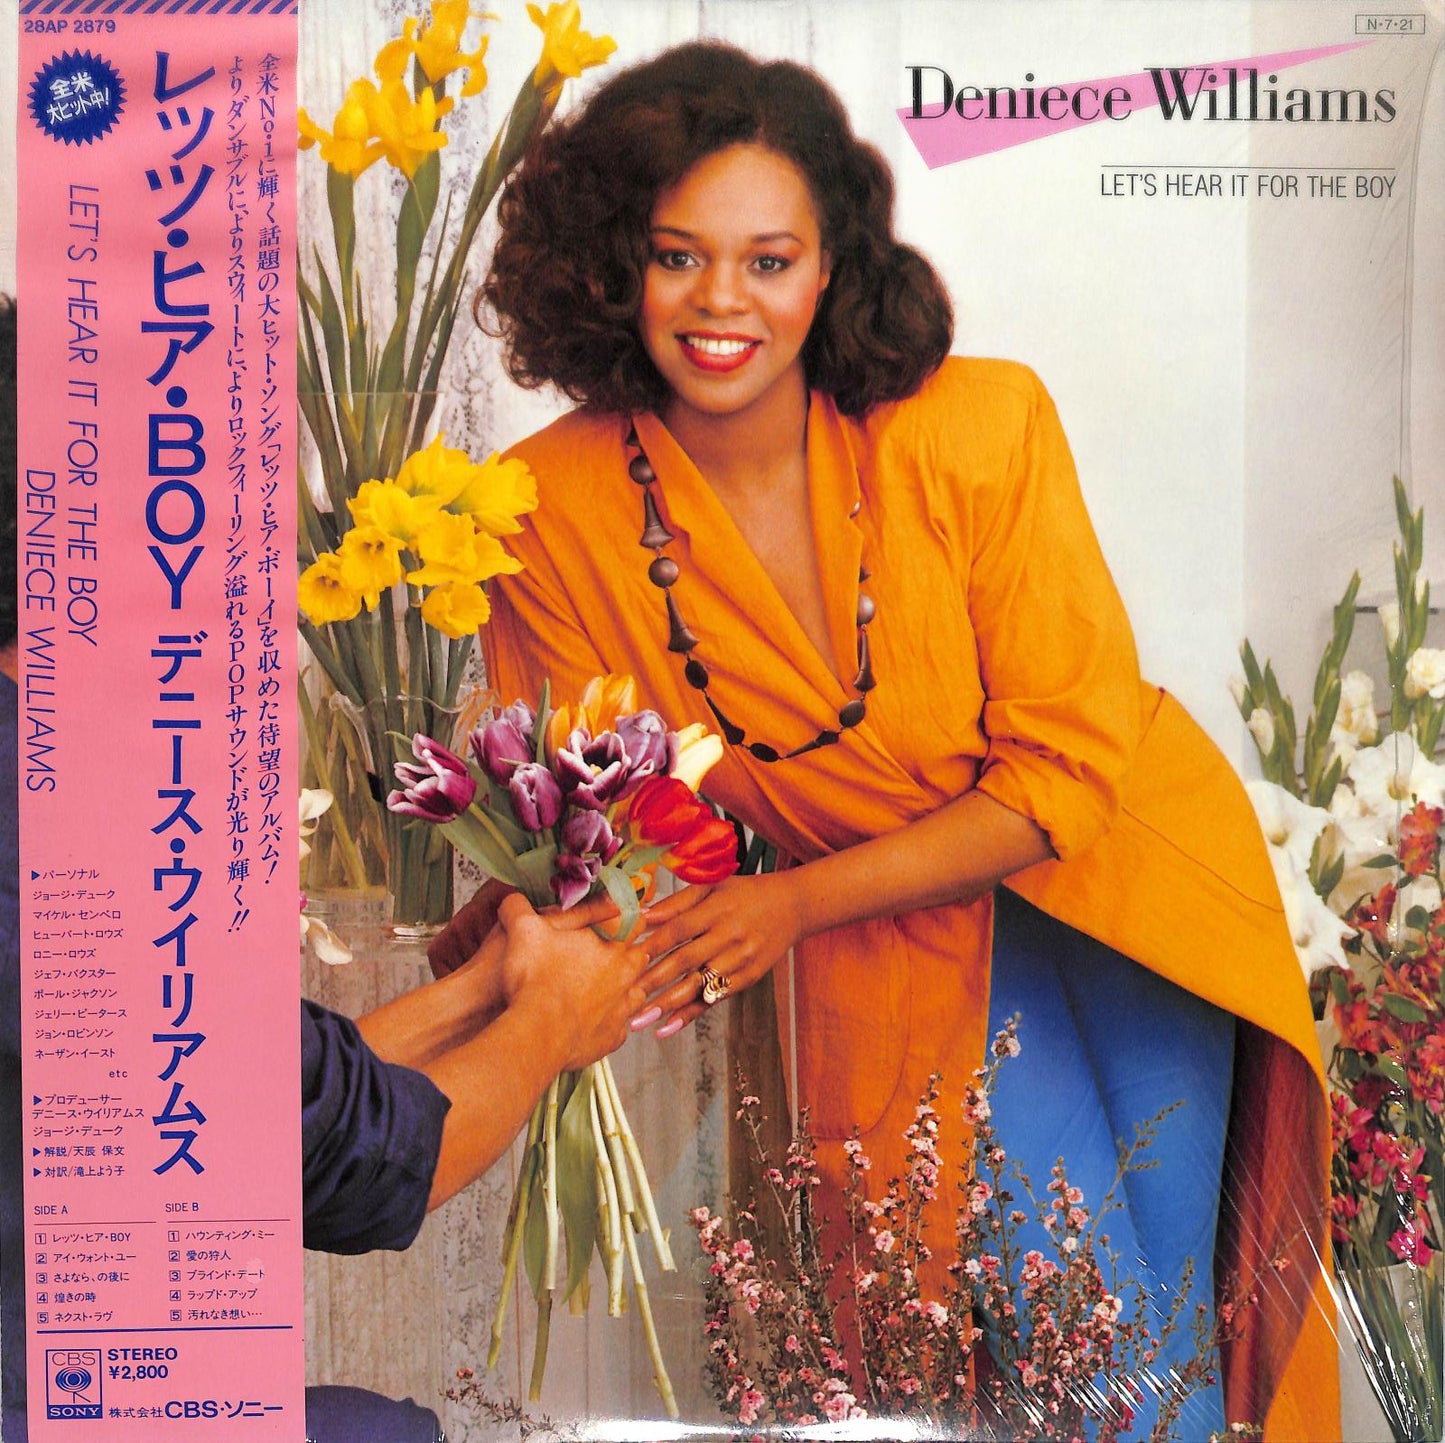 DENIECE WILLIAMS - Let's Hear It For The Boy